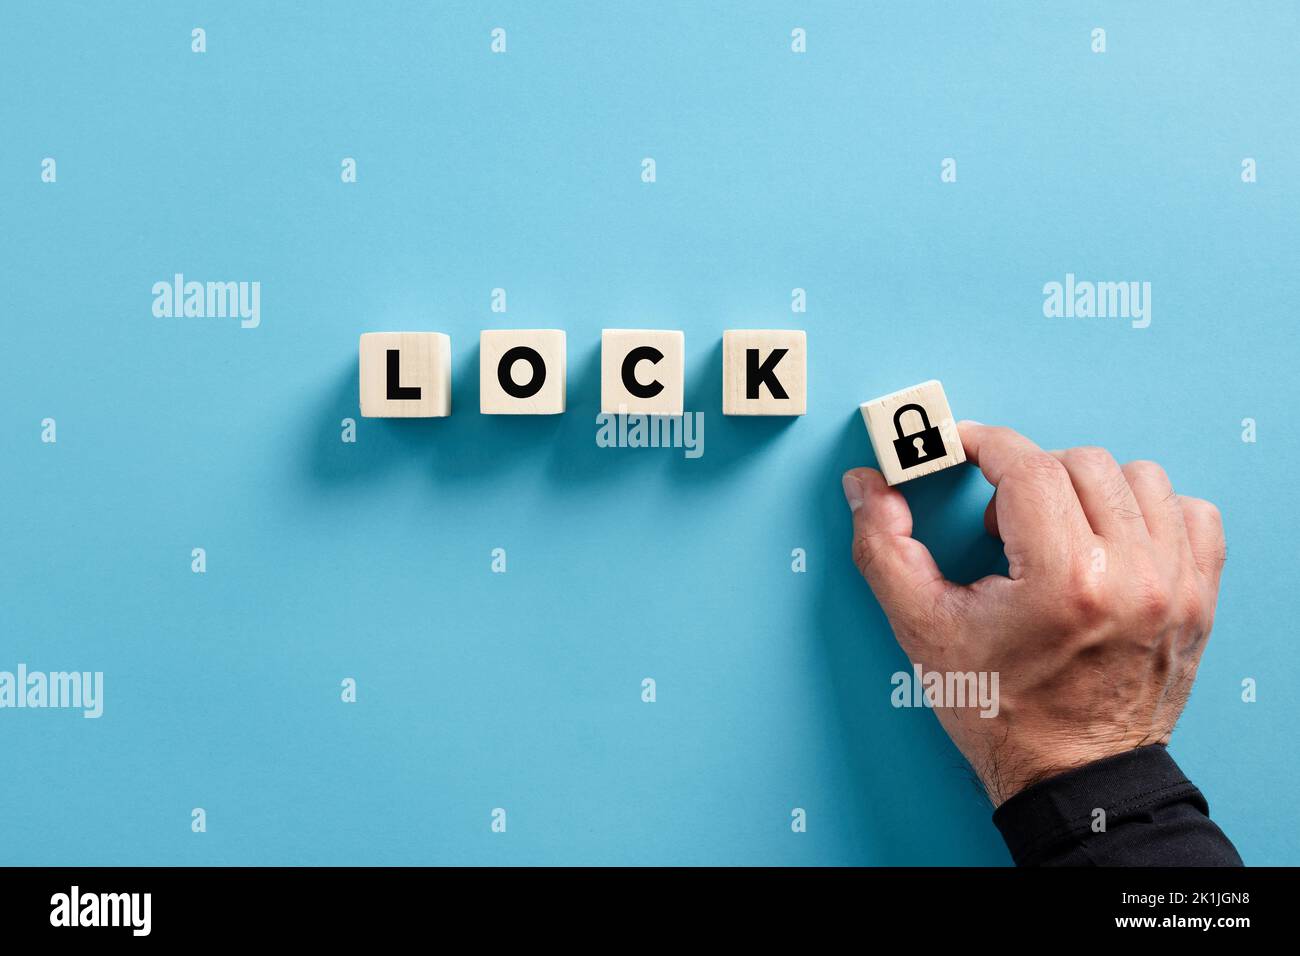 Male hand puts the wooden cube with padlock icon with the word lock. Privacy, security, protection and safety concepts. Stock Photo